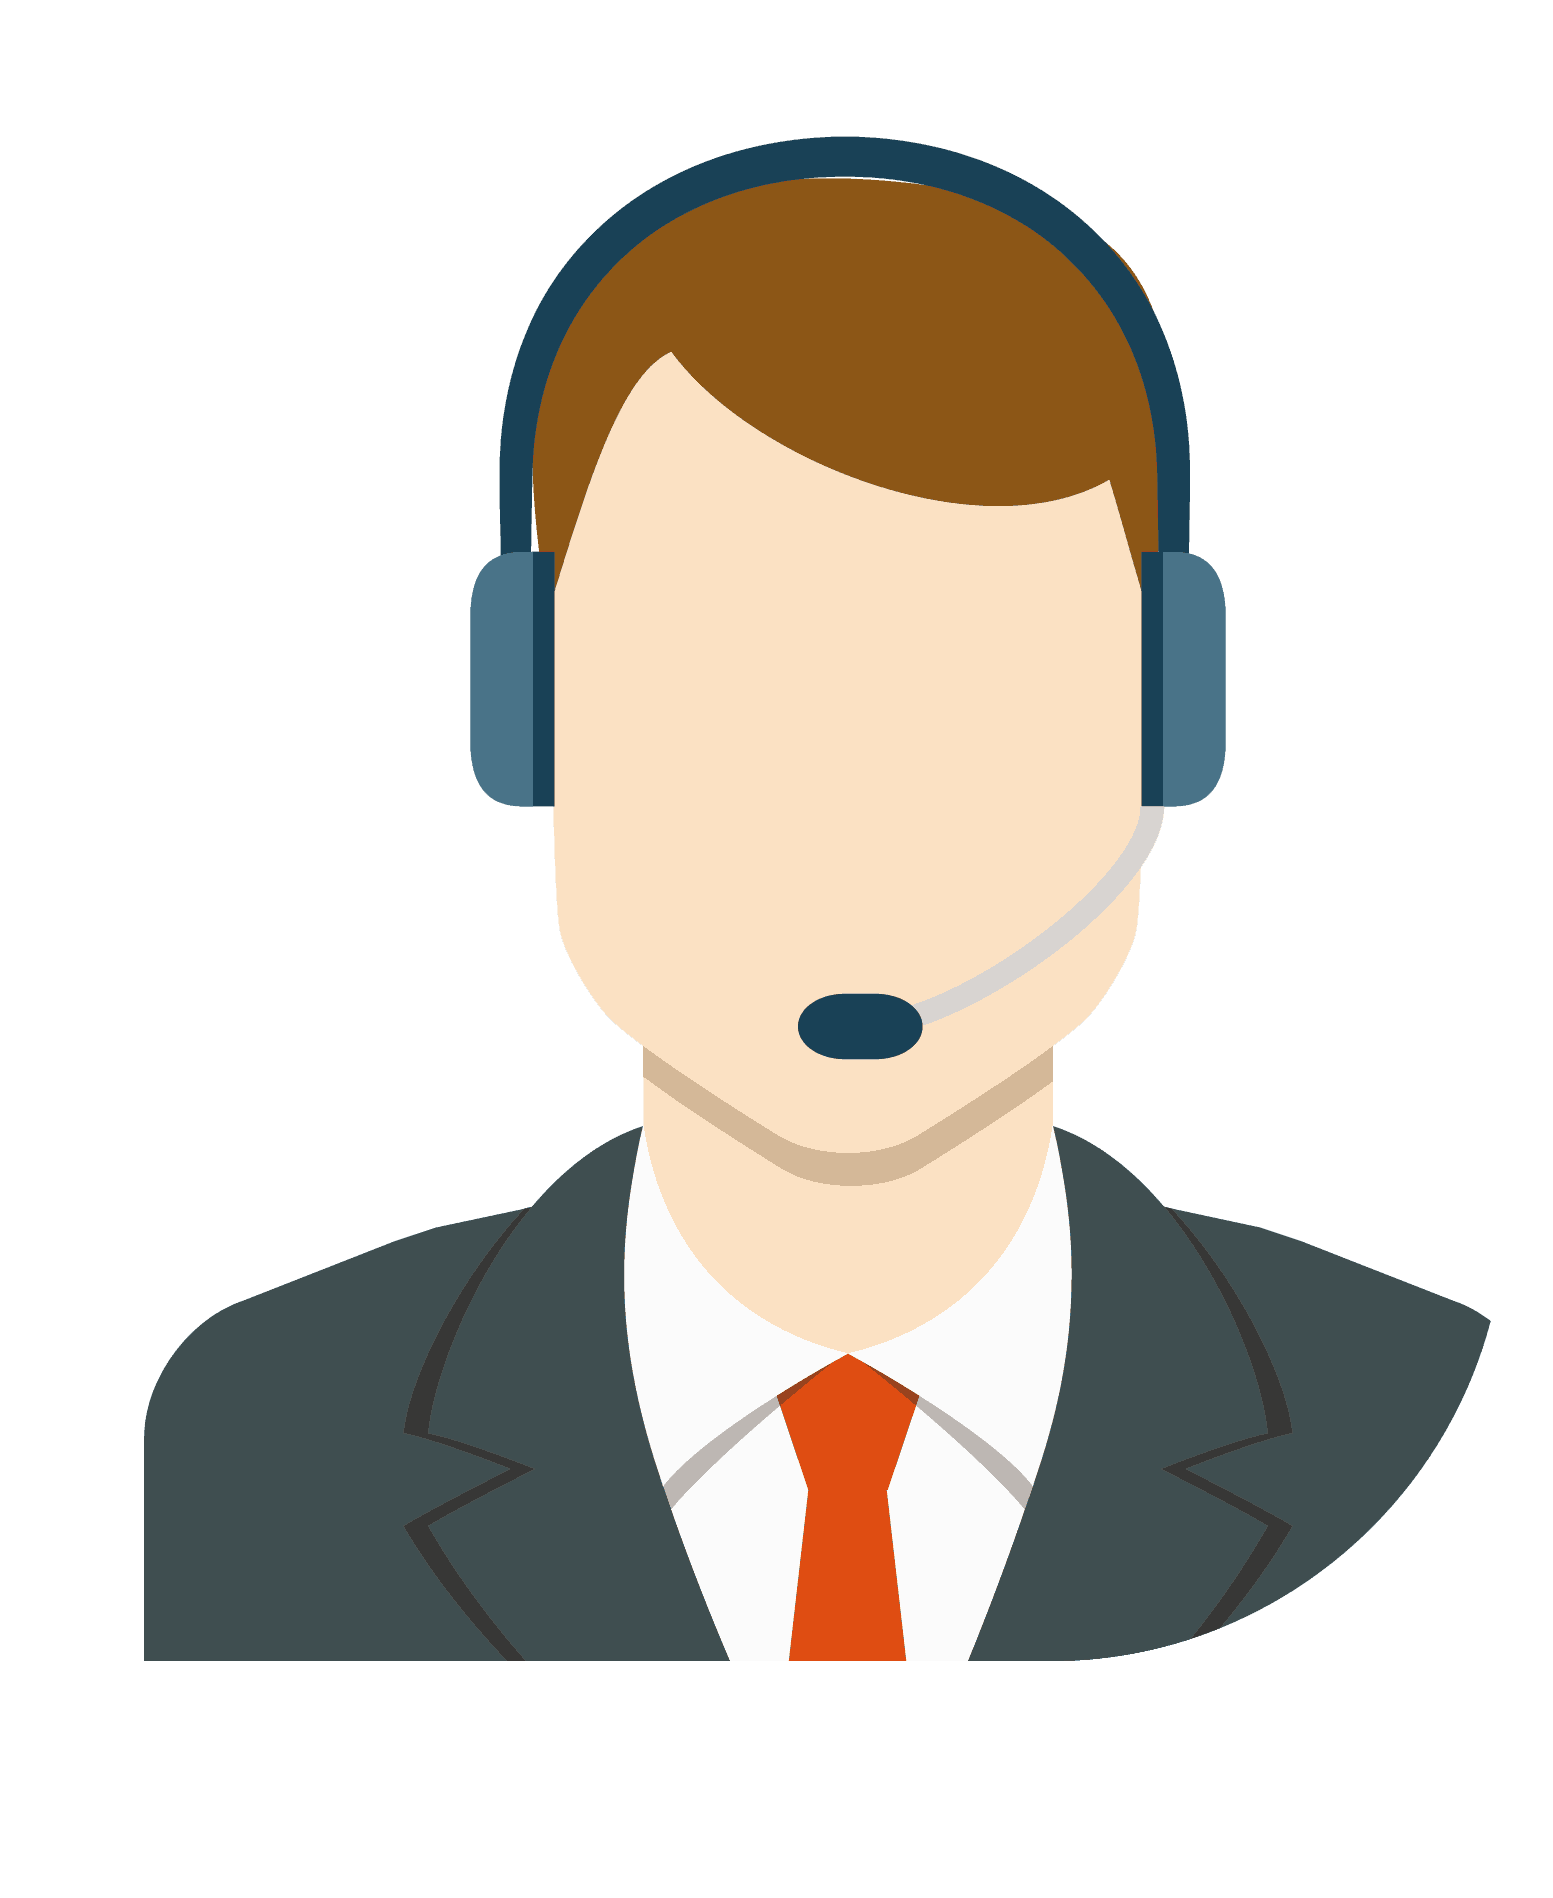 A person in a suit and tie with a headset